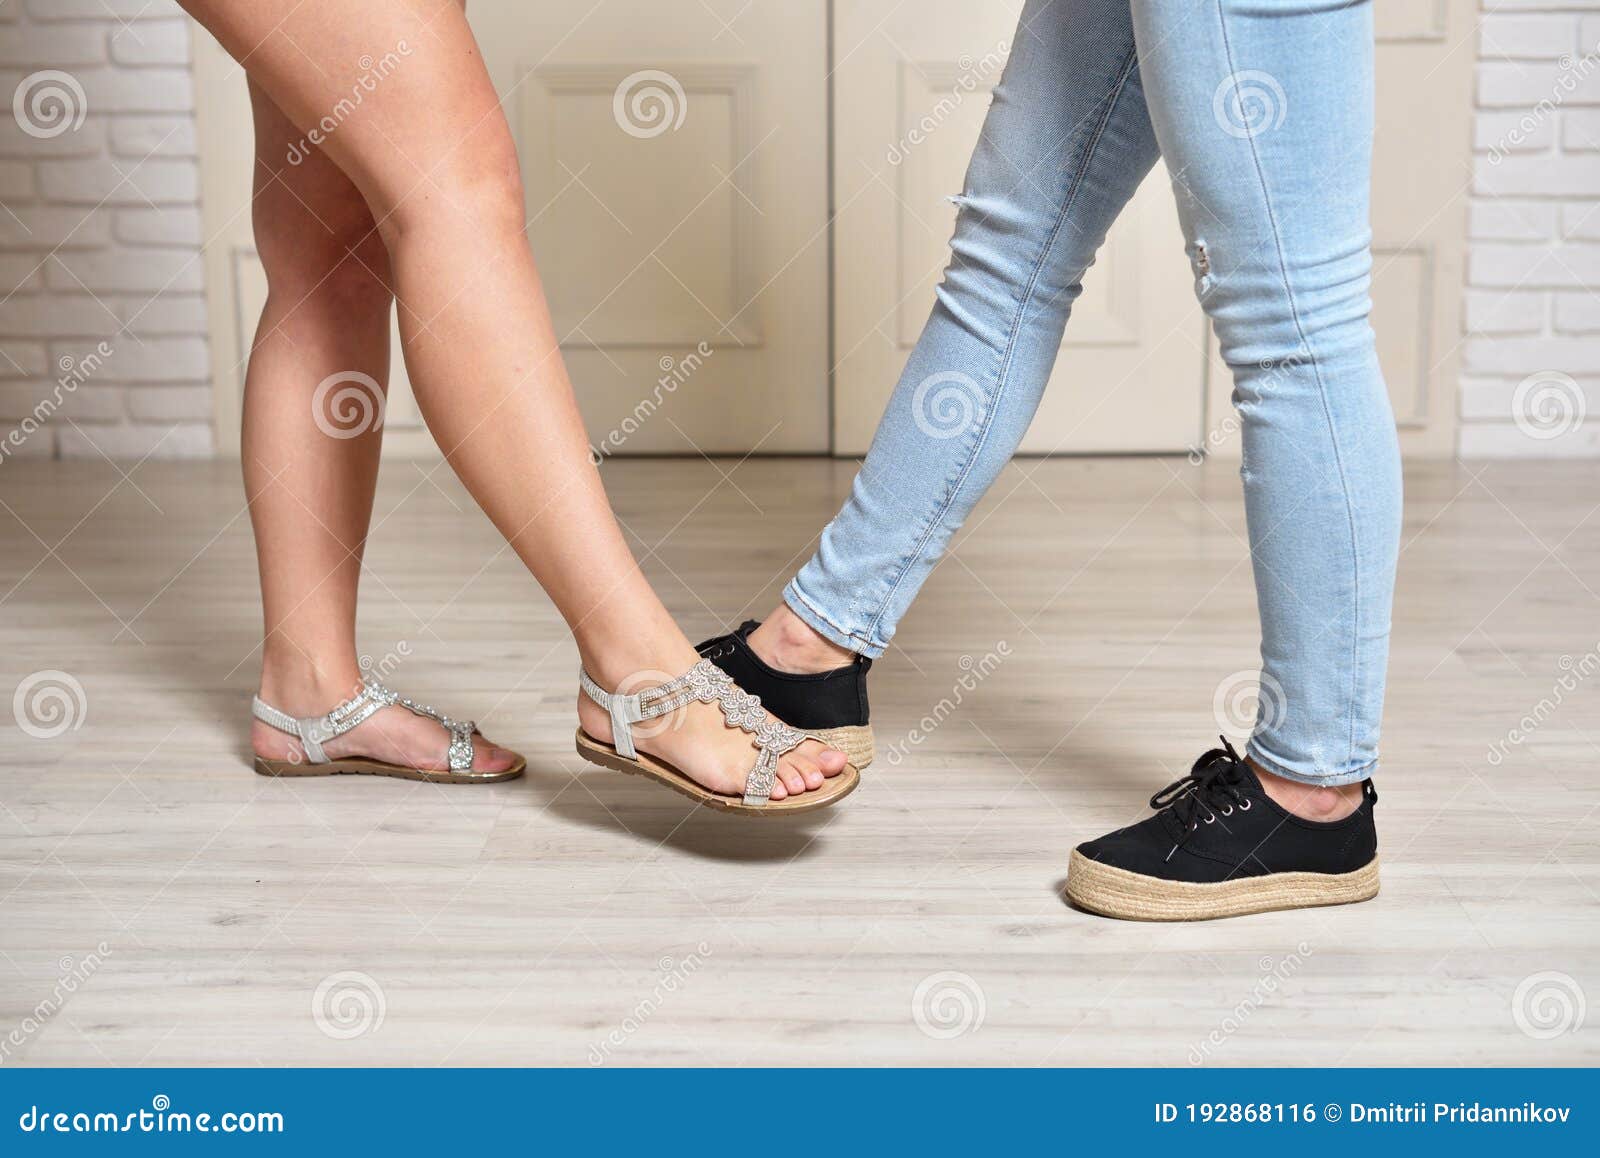 Greeting Two Women Touching Their Feet Social Distancing And Virus